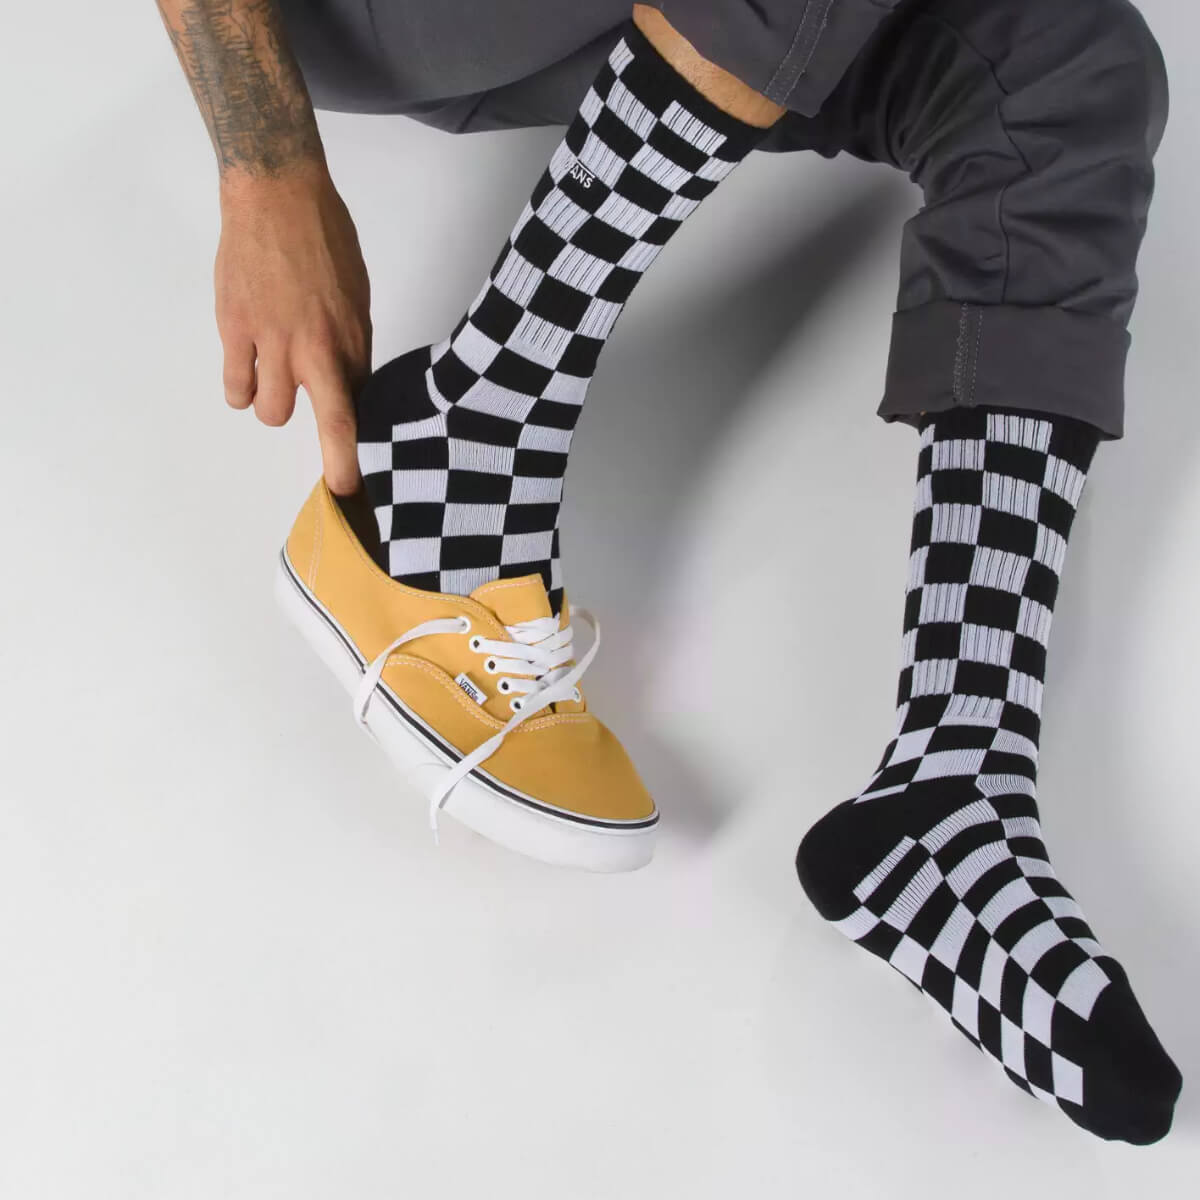 NEW ARRIVAL SOCKS FOR THE PERFECT STOCKING STUFFER